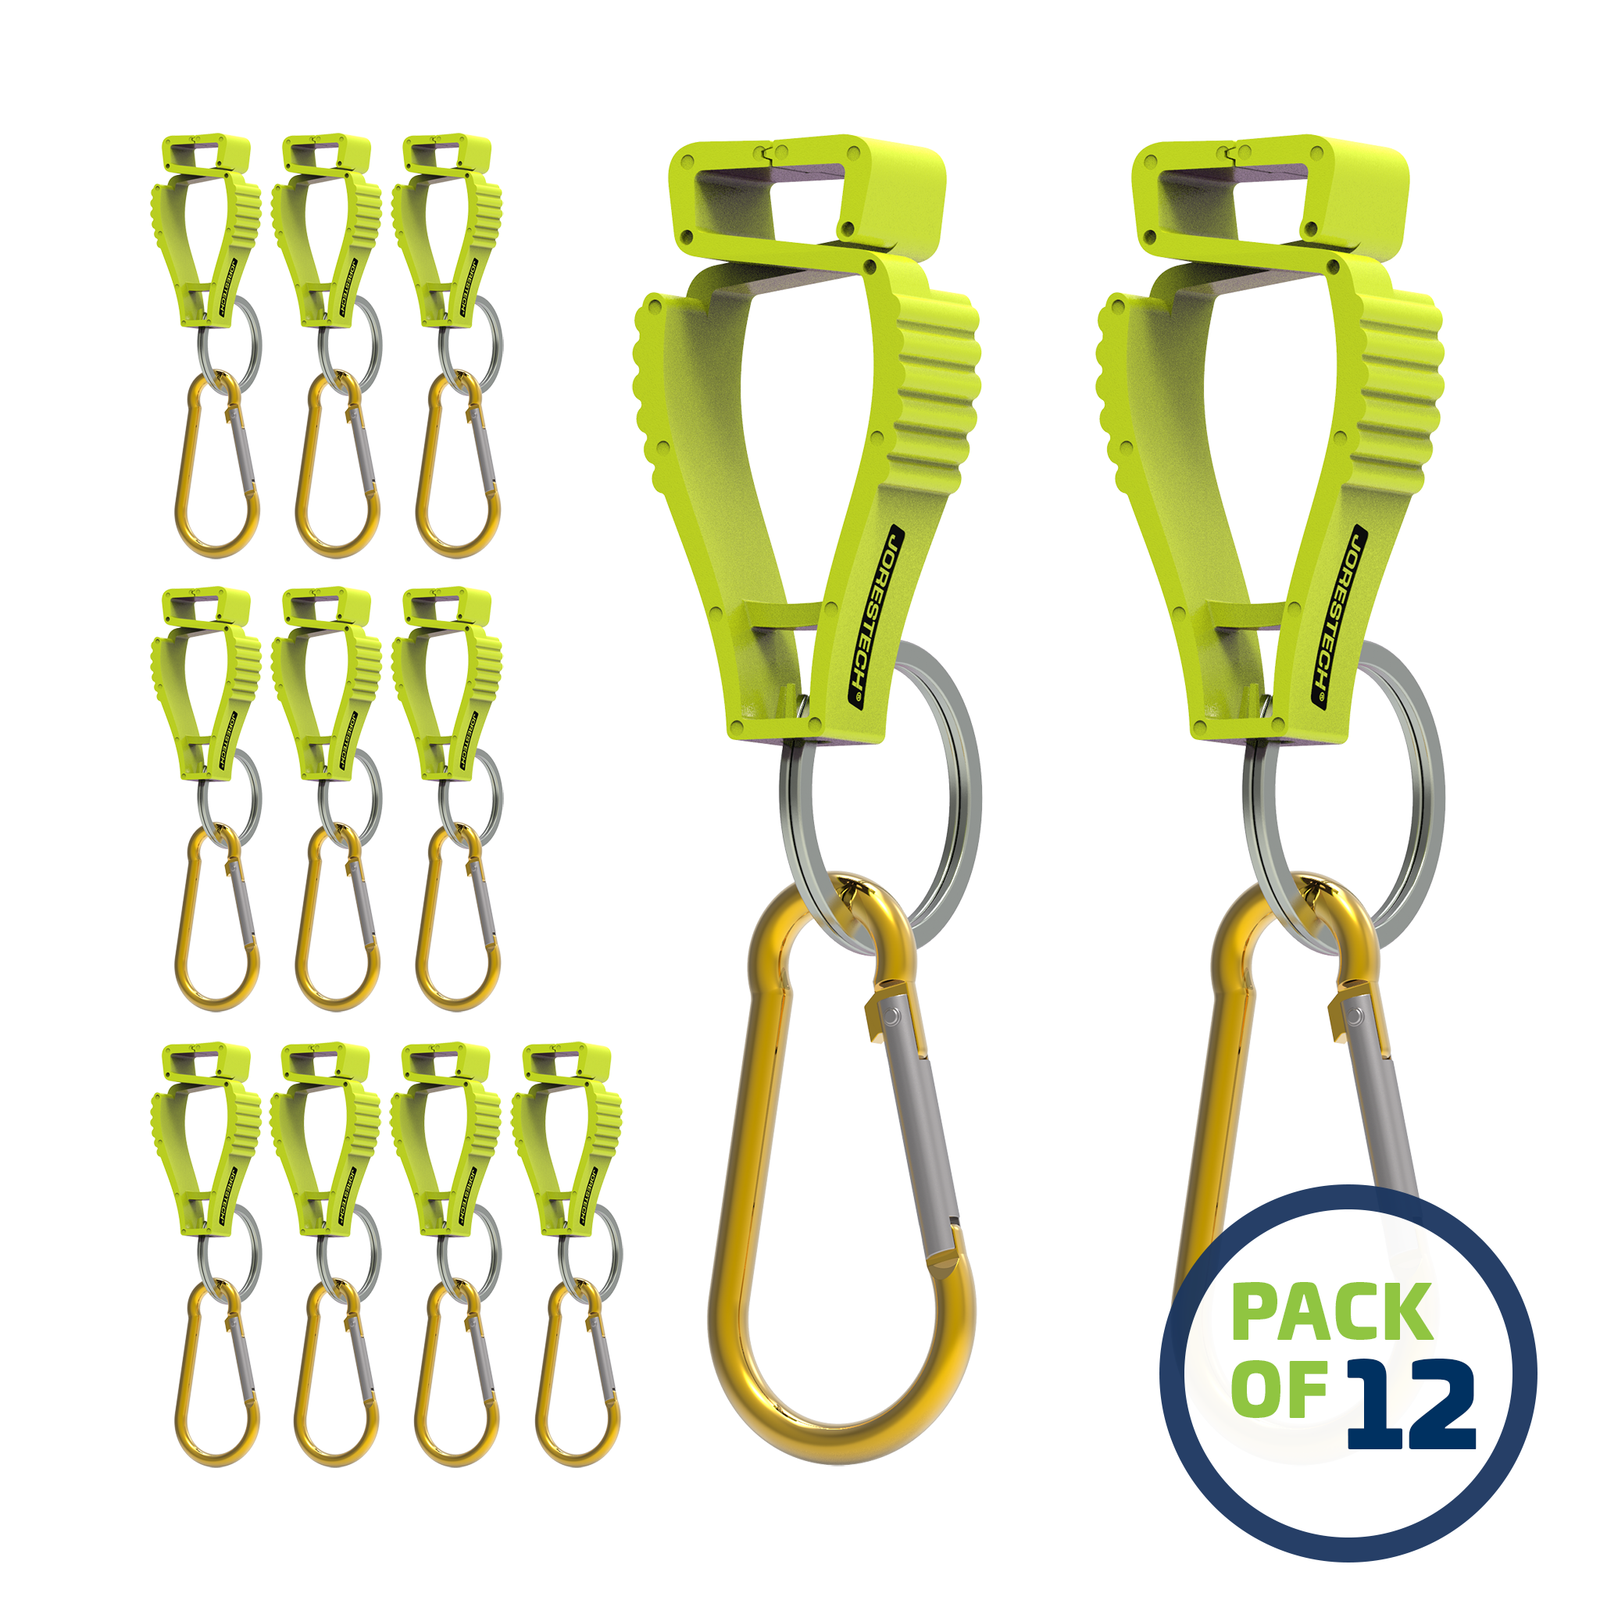 Pack of 12 Lime JORESTECH glove clip safety holders with carabiner 